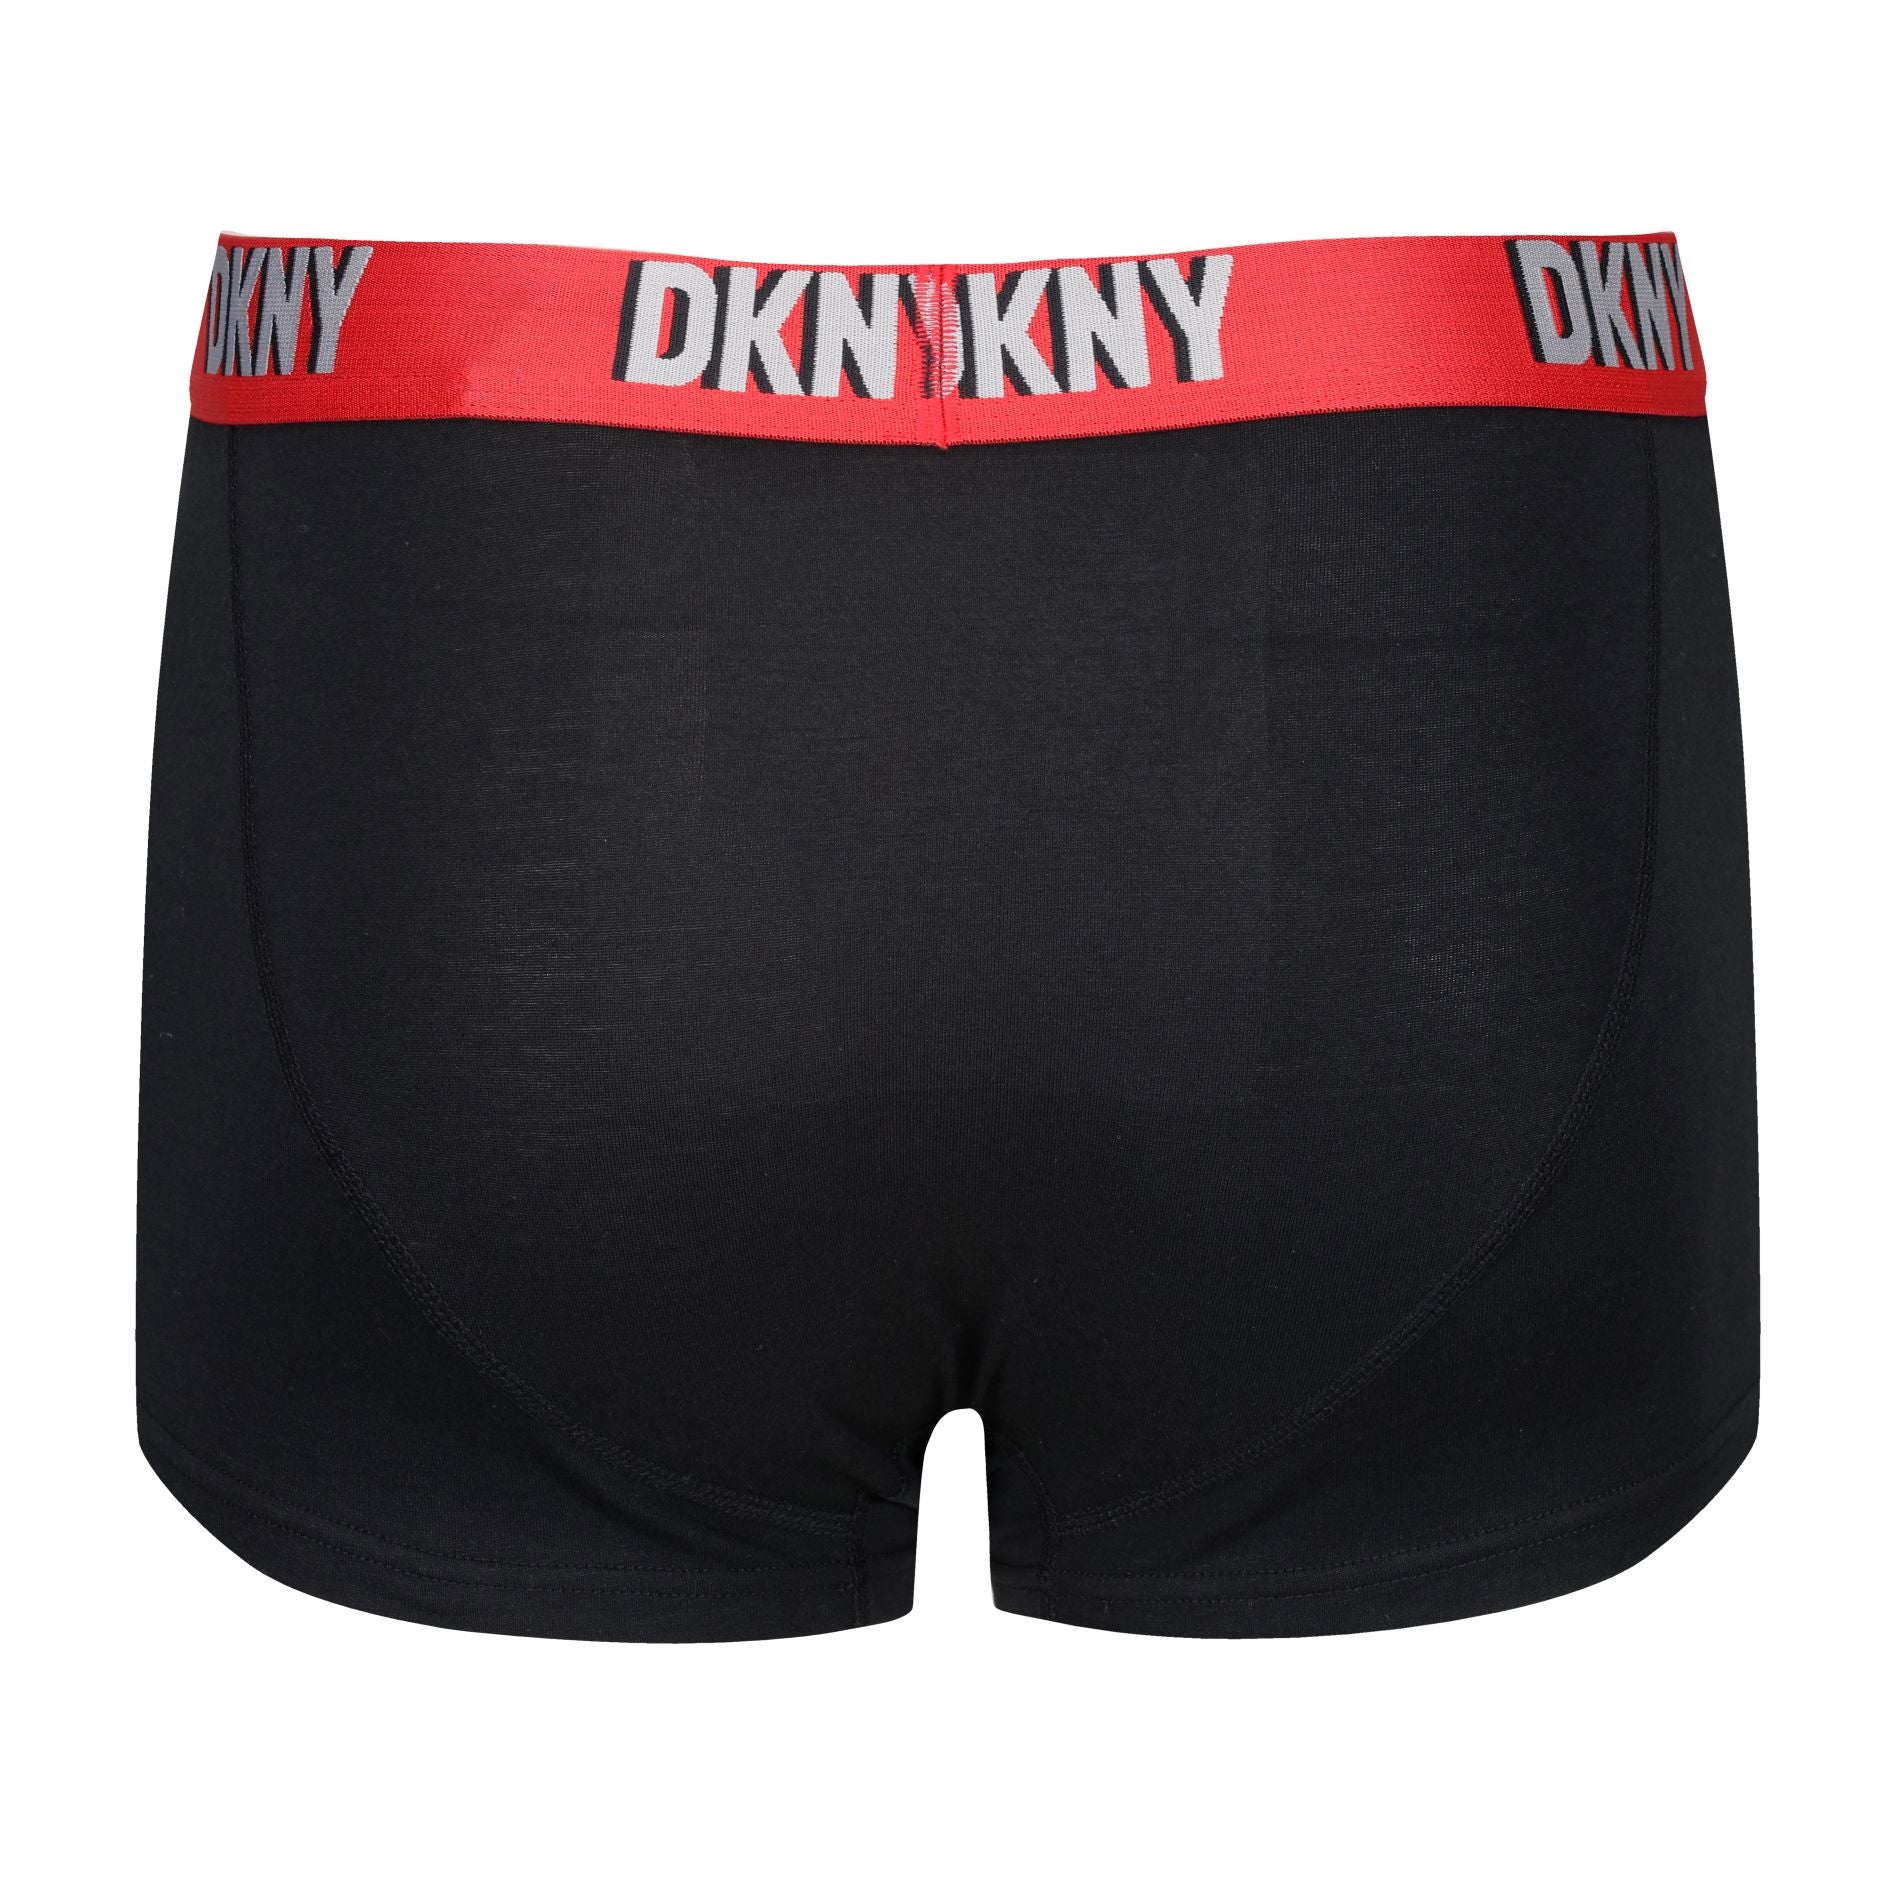 DKNY Mens Monmouth Cotton Stretch 3 pack Trunks - Black/Print/Lead